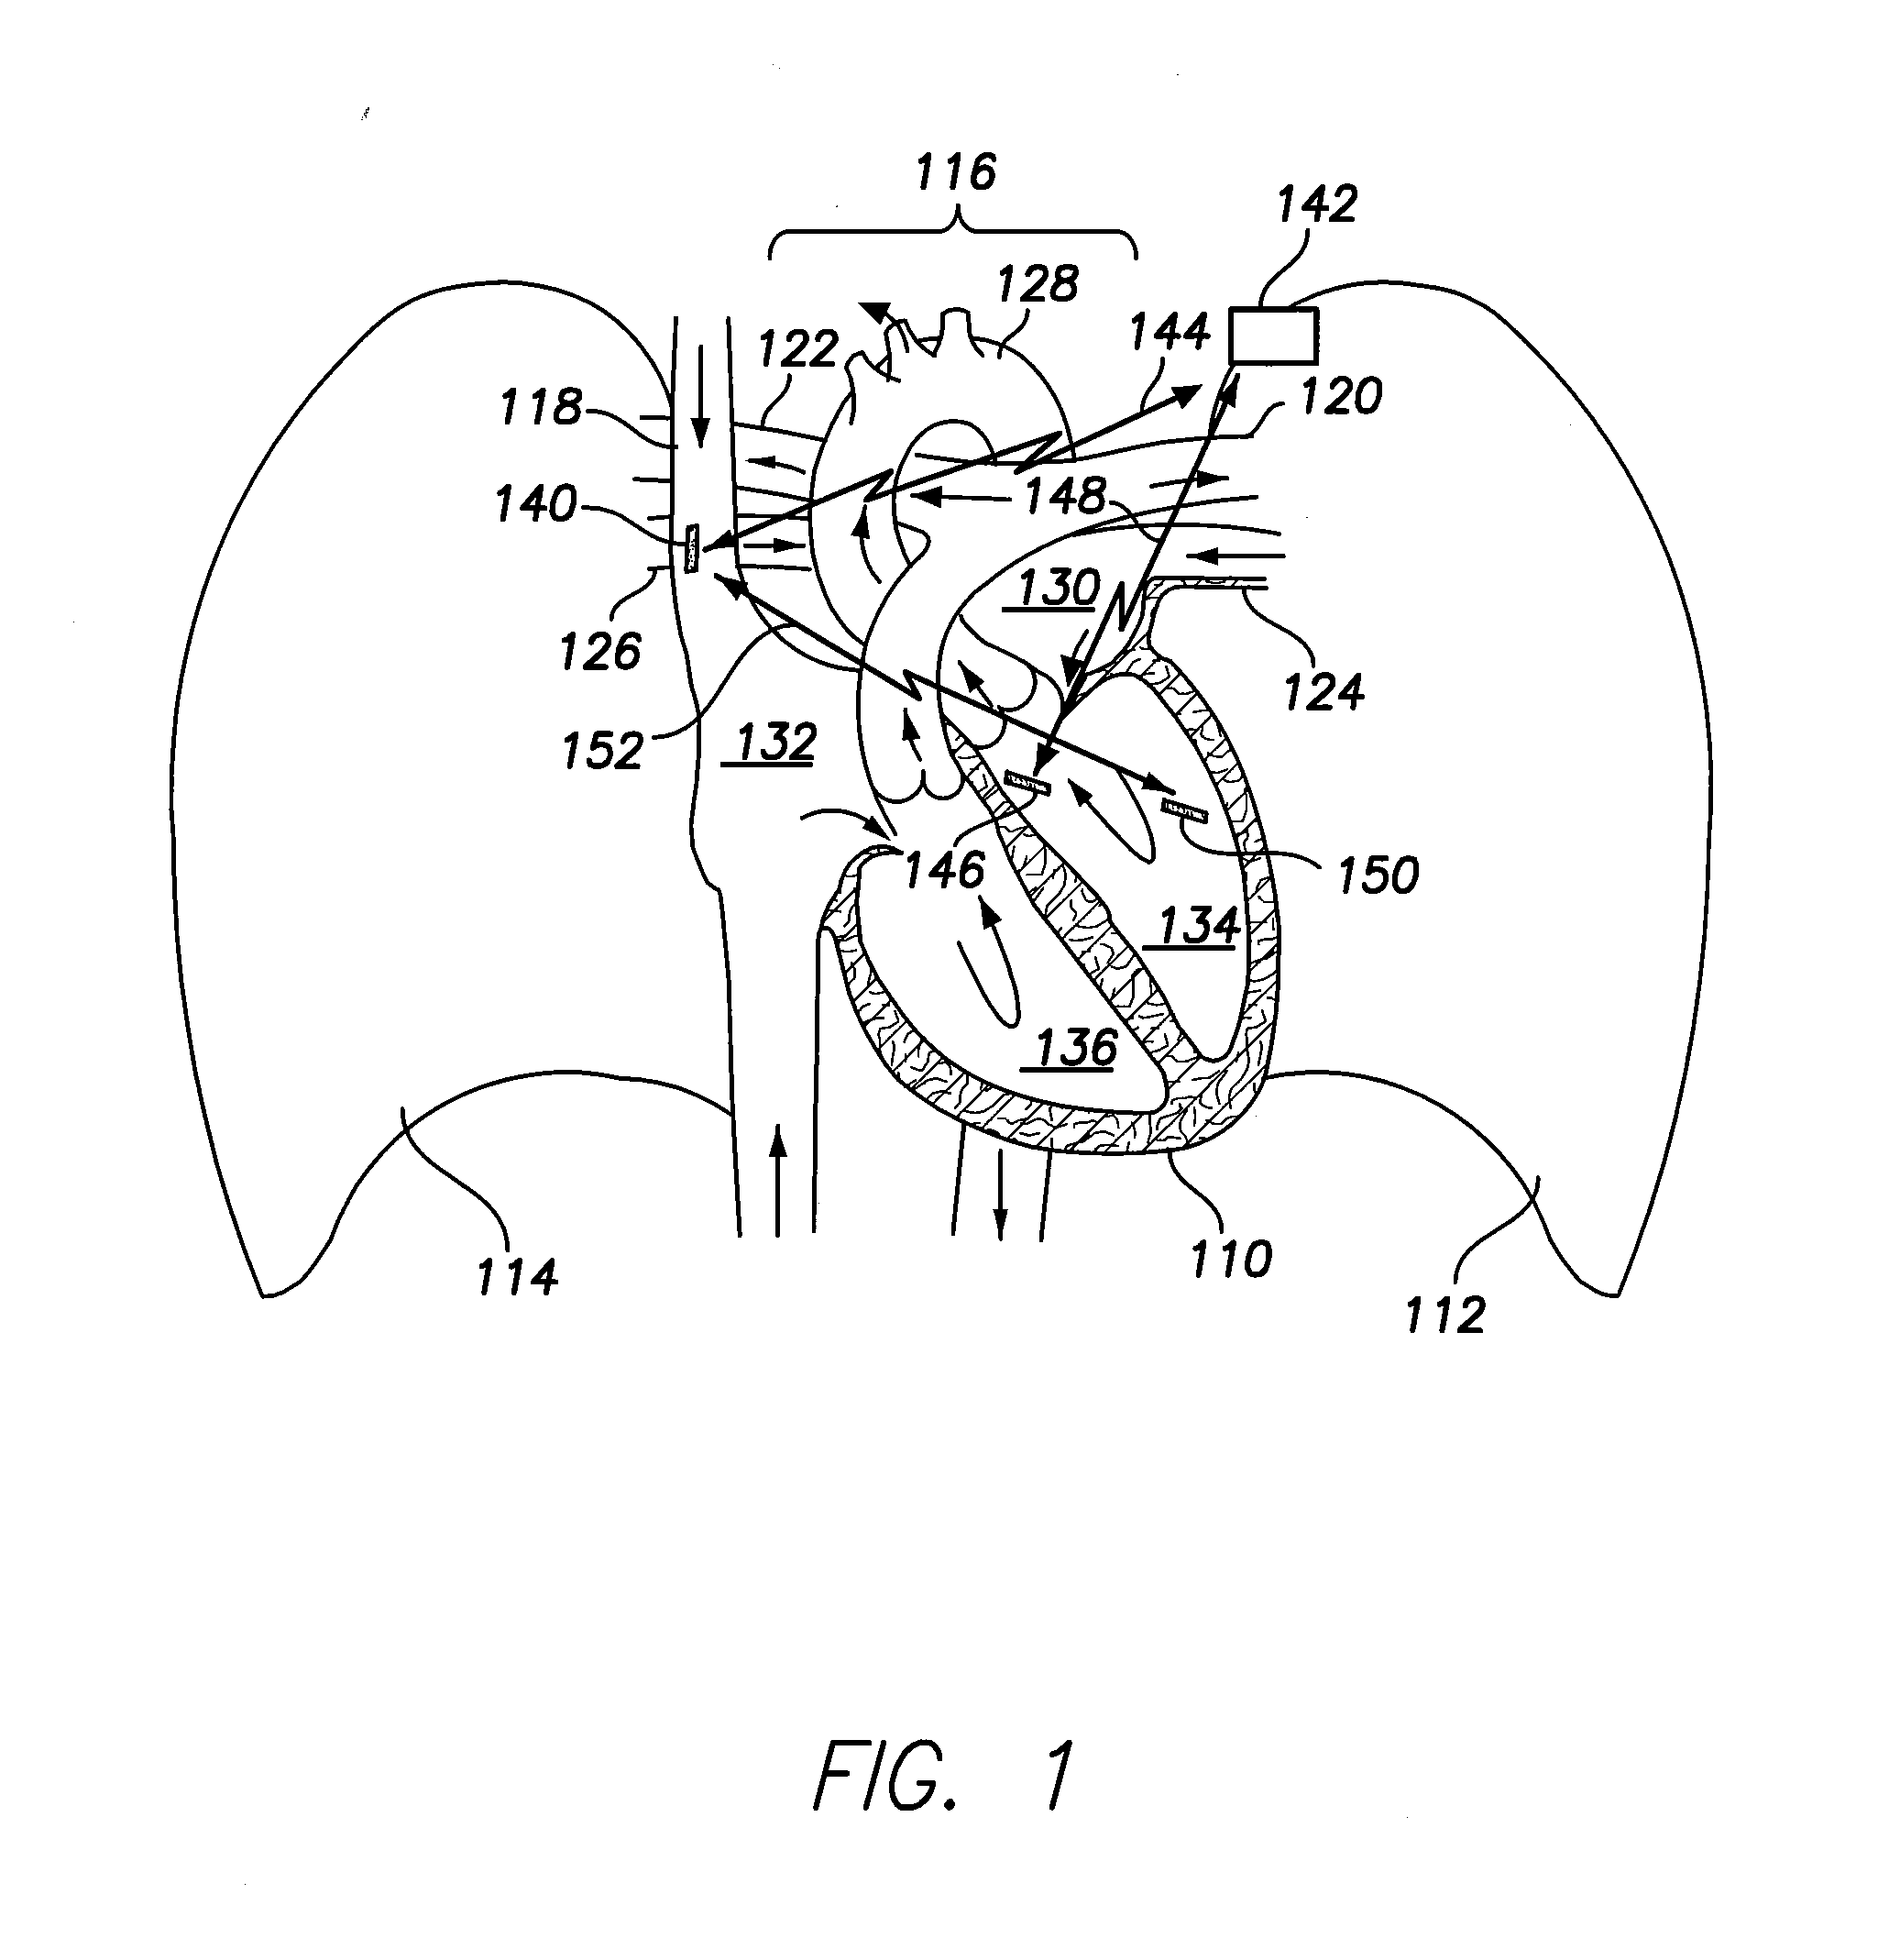 Method and system for discriminating and monitoring atrial arrhythmia based on cardiogenic impedance